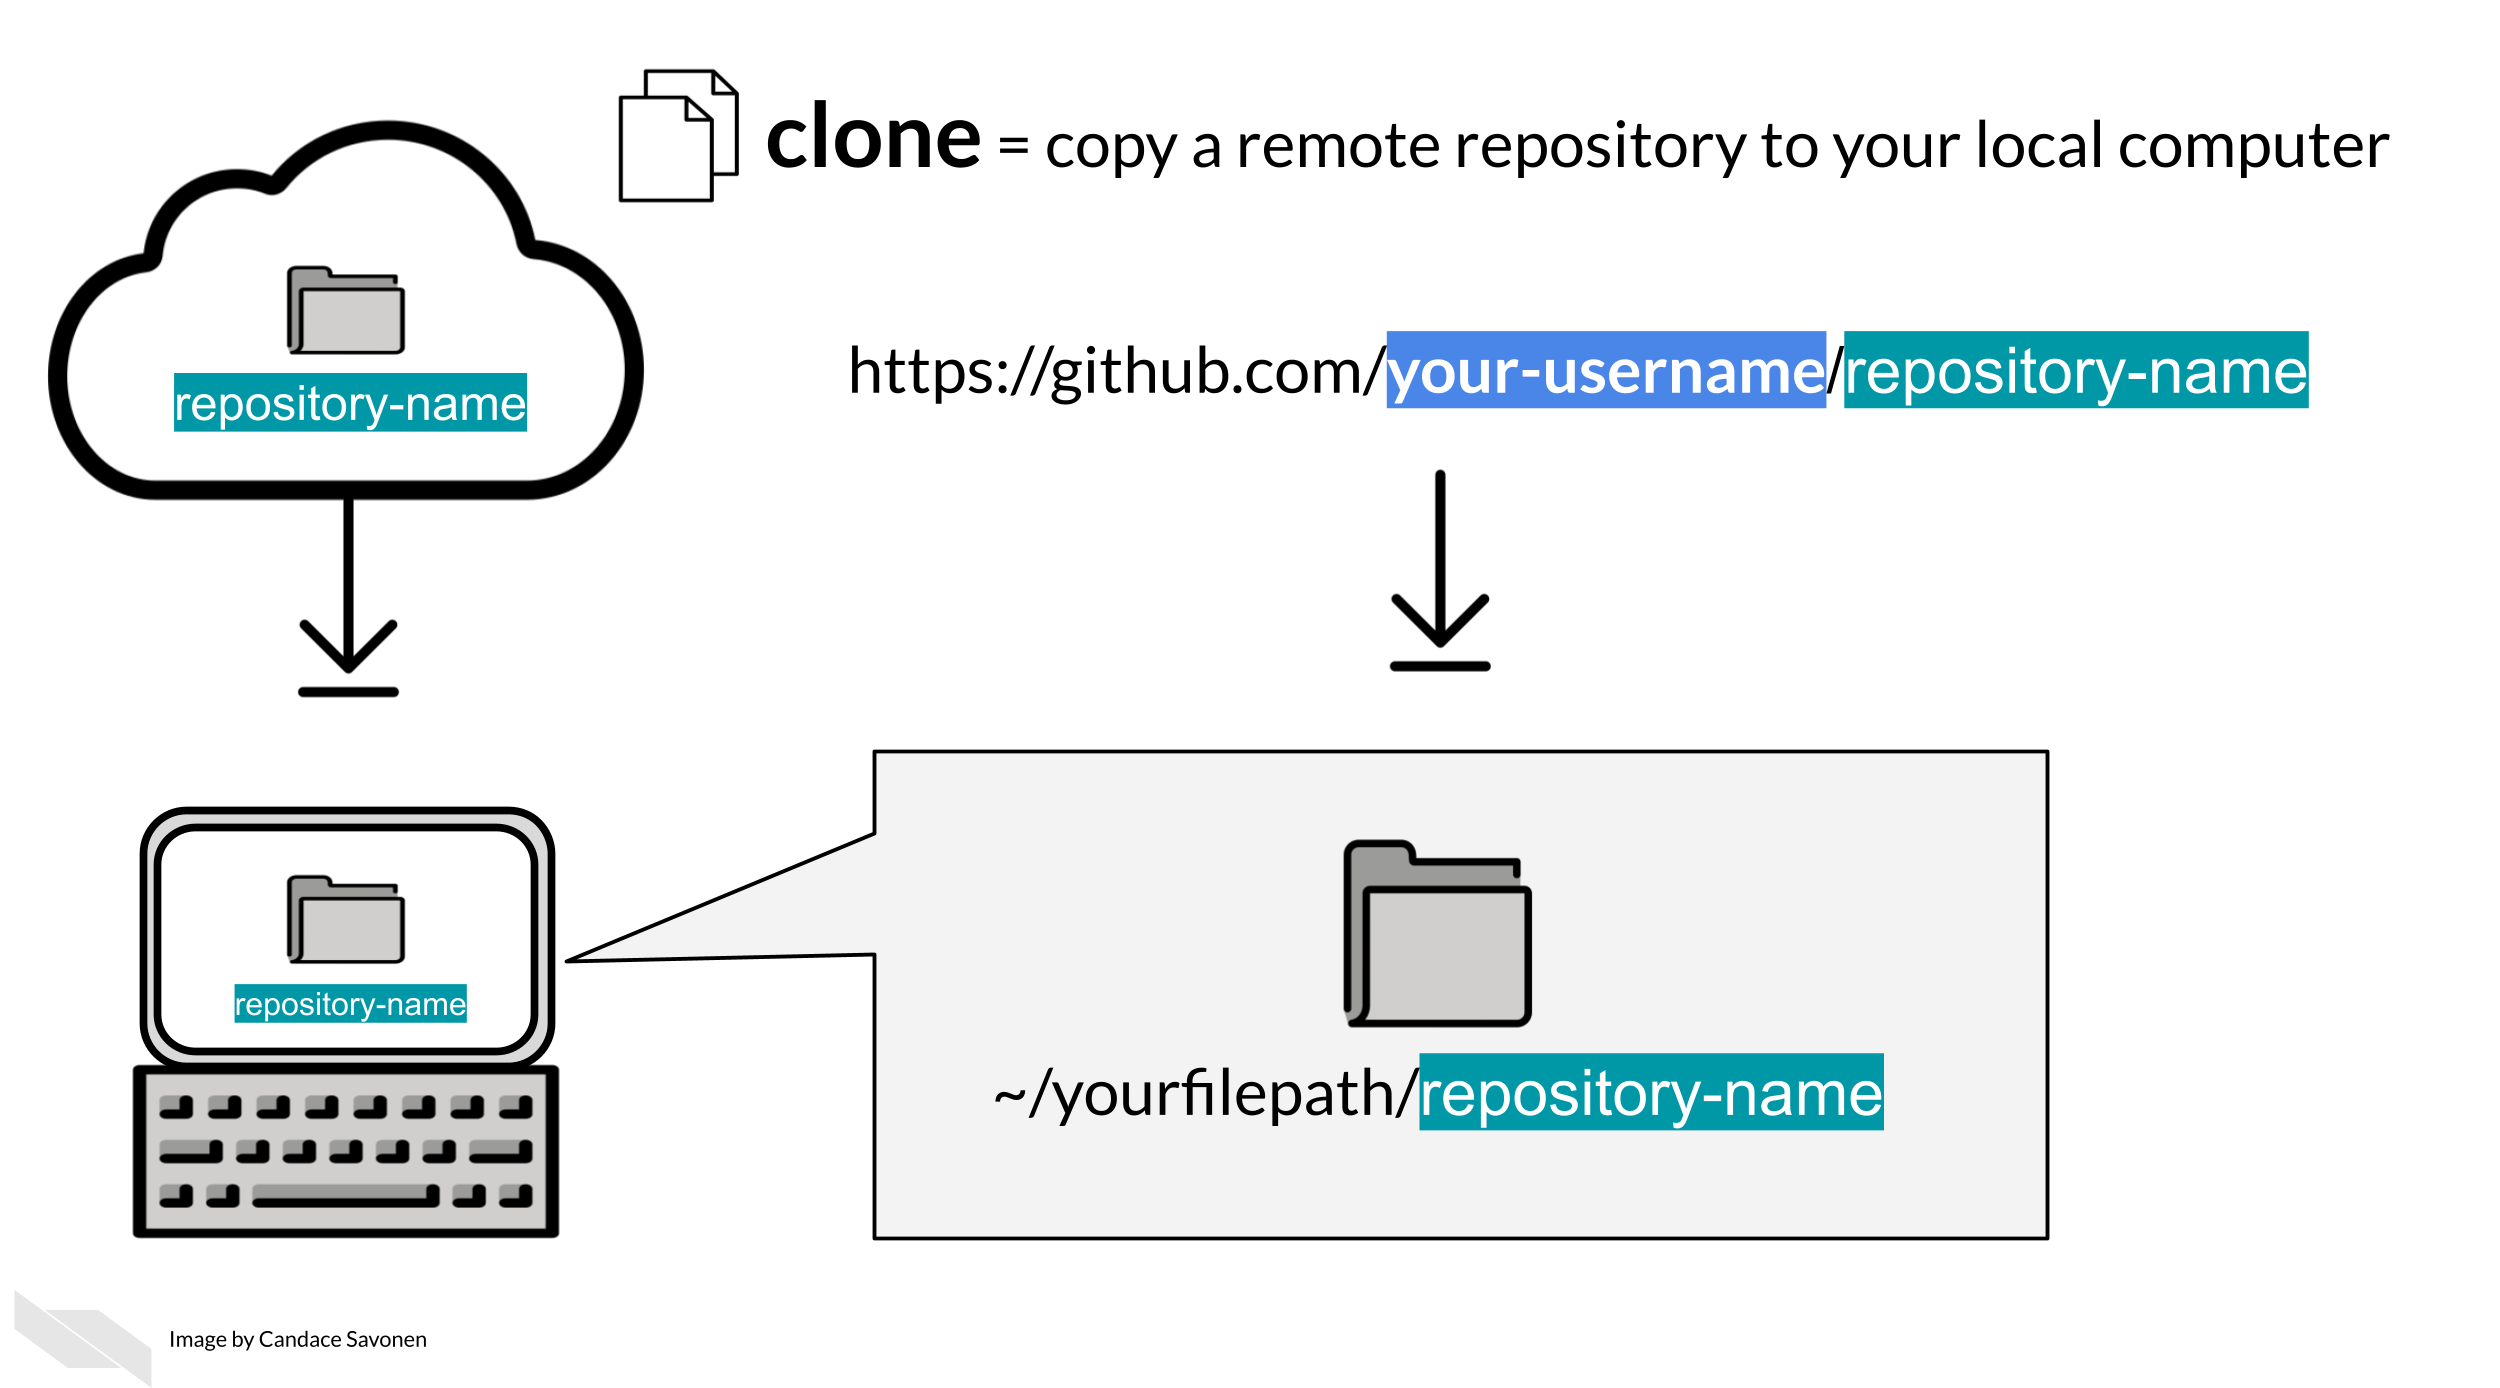 To clone a repository means to copy a remote repository to your local computer